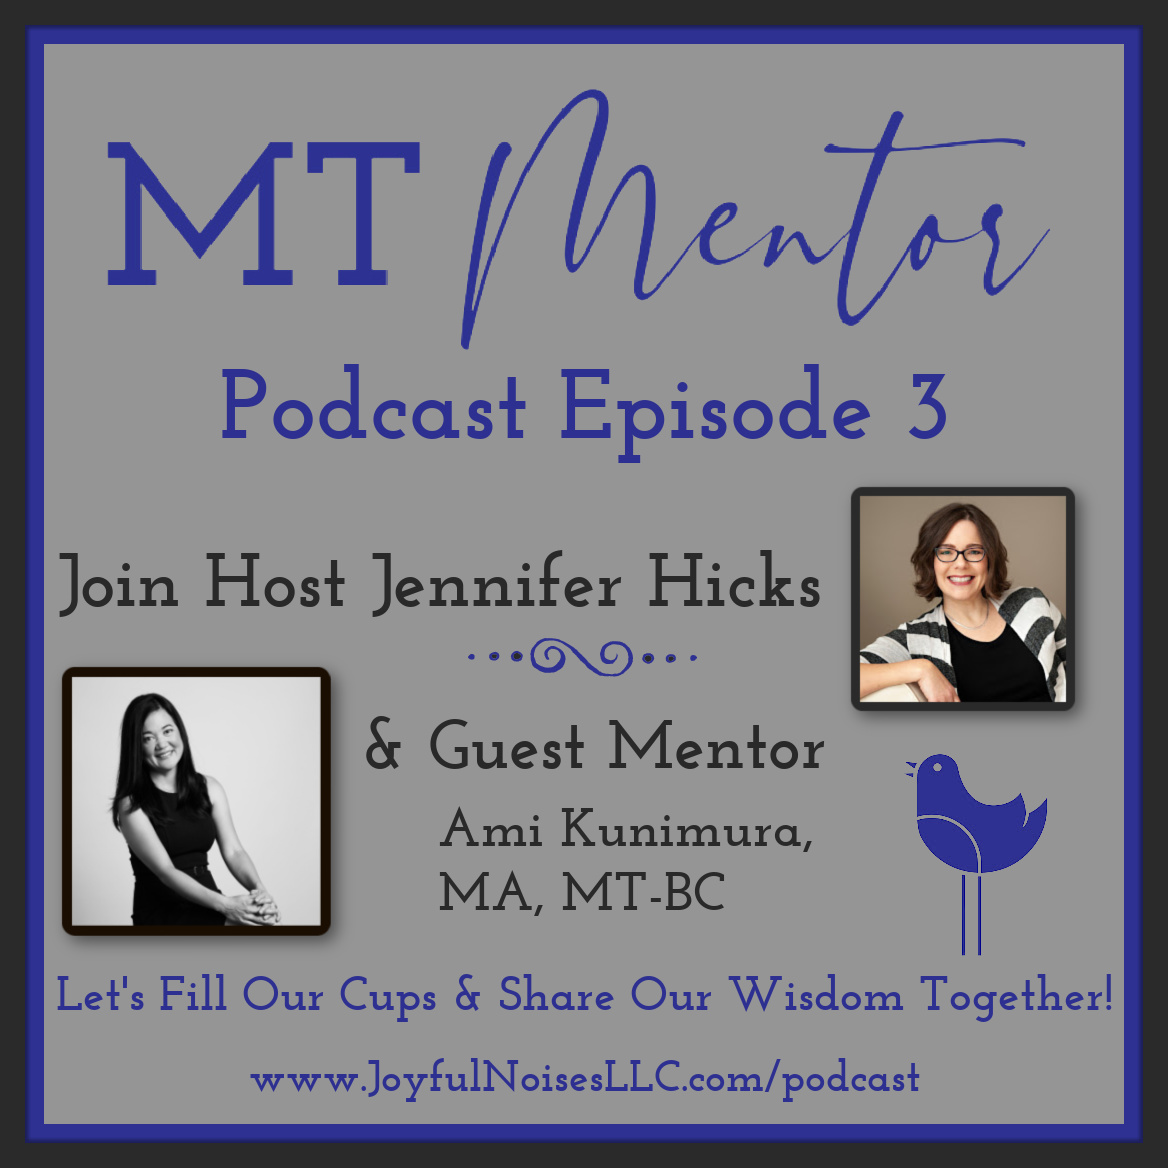 Headshots of host Jennifer Hicks and guest mentor Ami Kunimura, MA, MT-BC with the podcast name, tagline, and web address